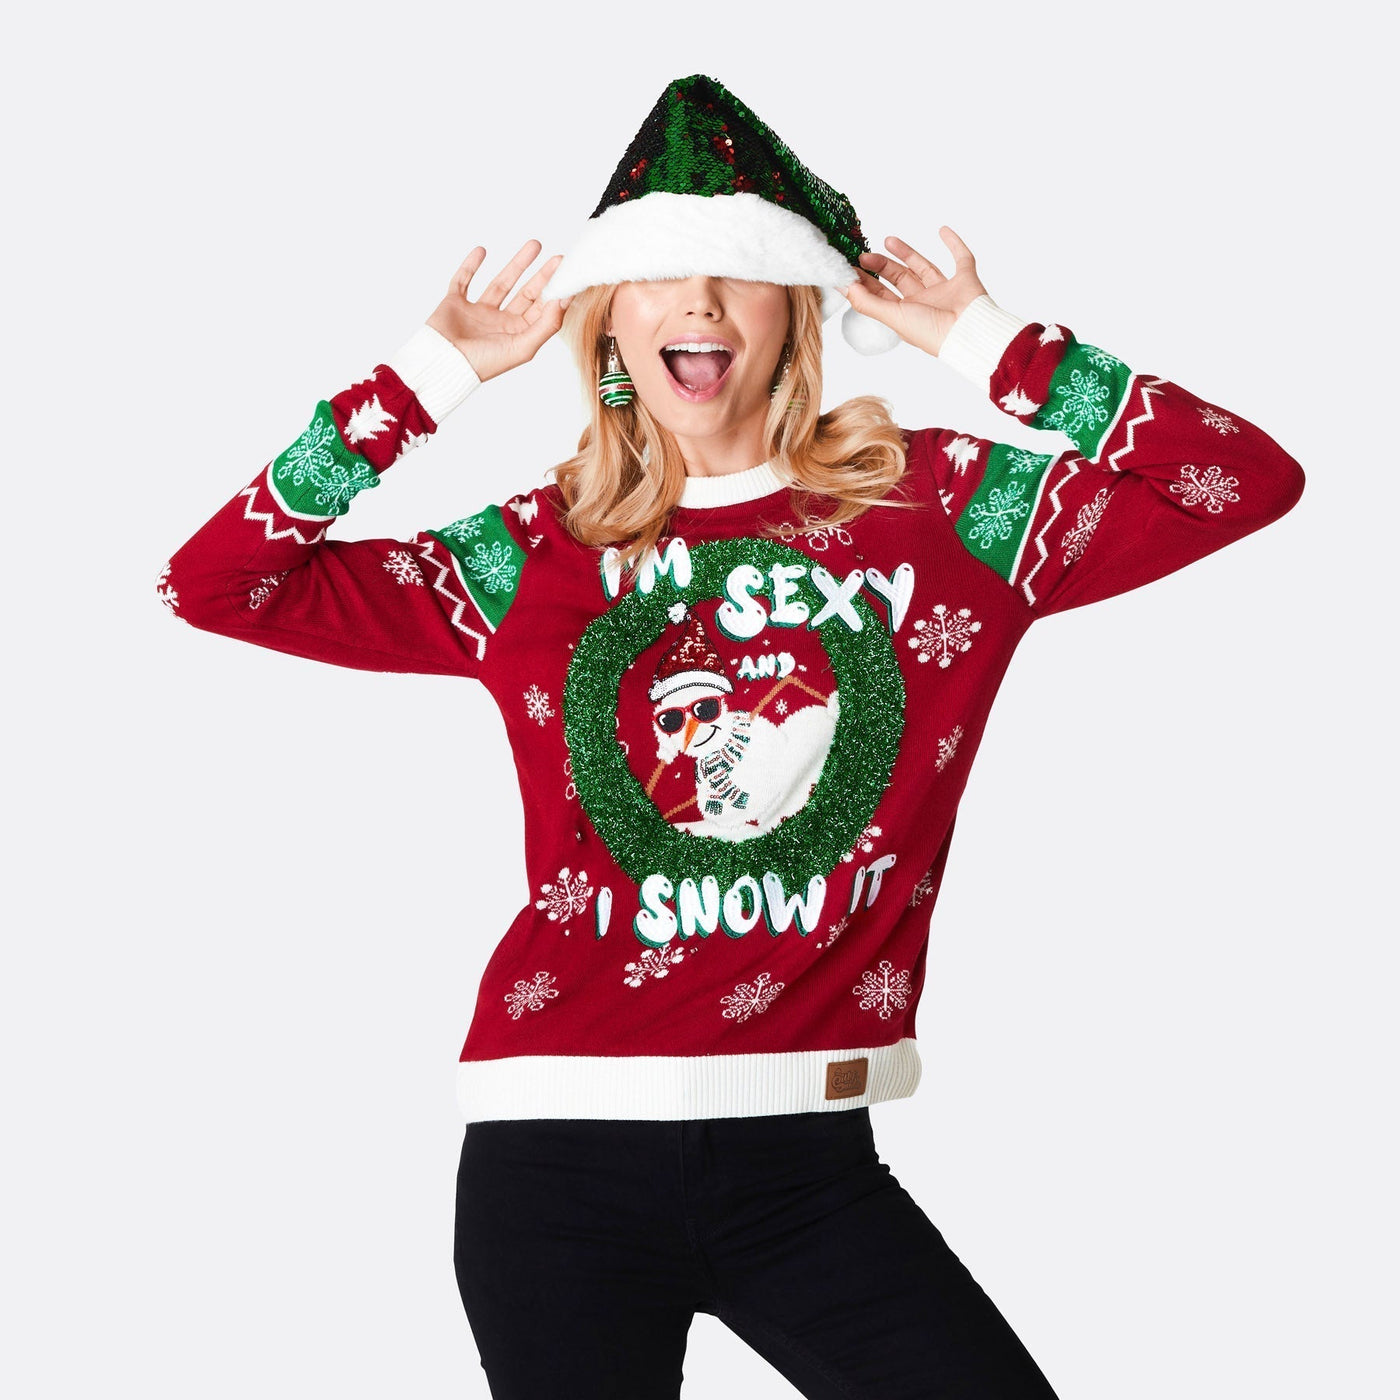 I'm Sexy and I Snow It Julesweater Dame